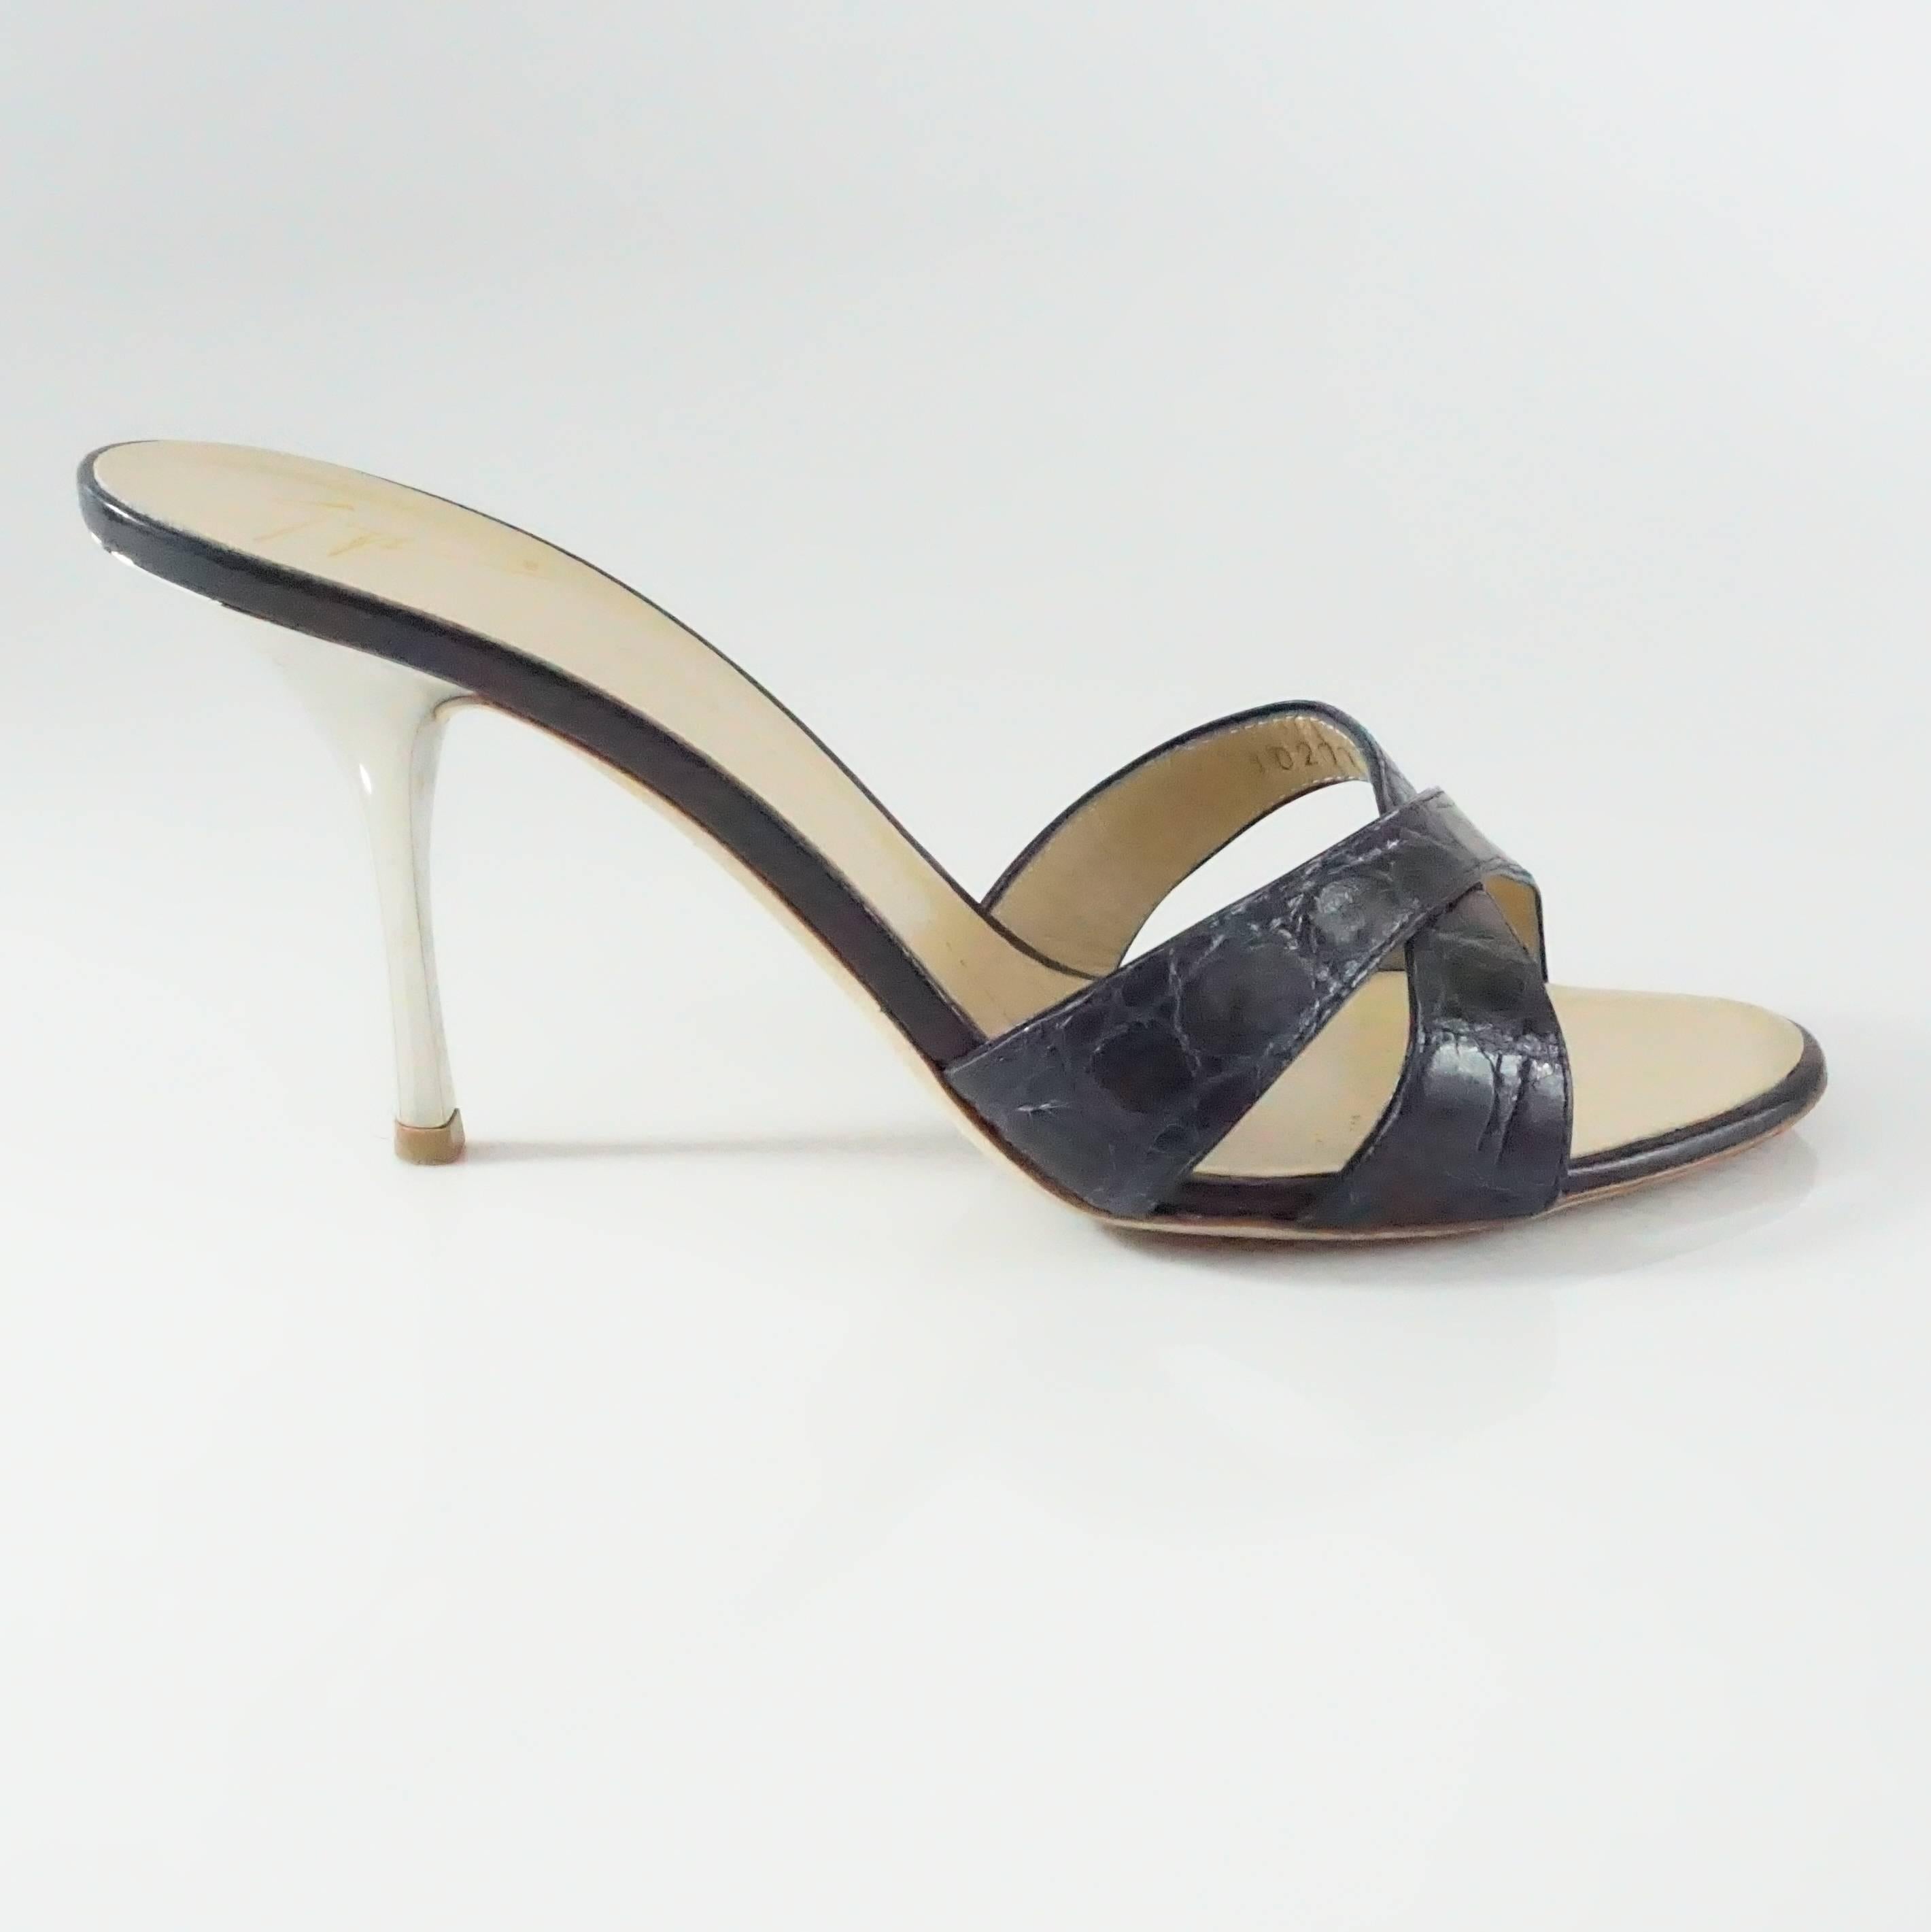 Giuseppe Zanotti Navy Alligator Crisscross Slide w/ Silver Mirrored Heel-39.5  This beautiful shoe is in excellent condition, with only wear to the sole of the shoe. Navy shoes are not easy to find, and this elegant and sexy version is a must